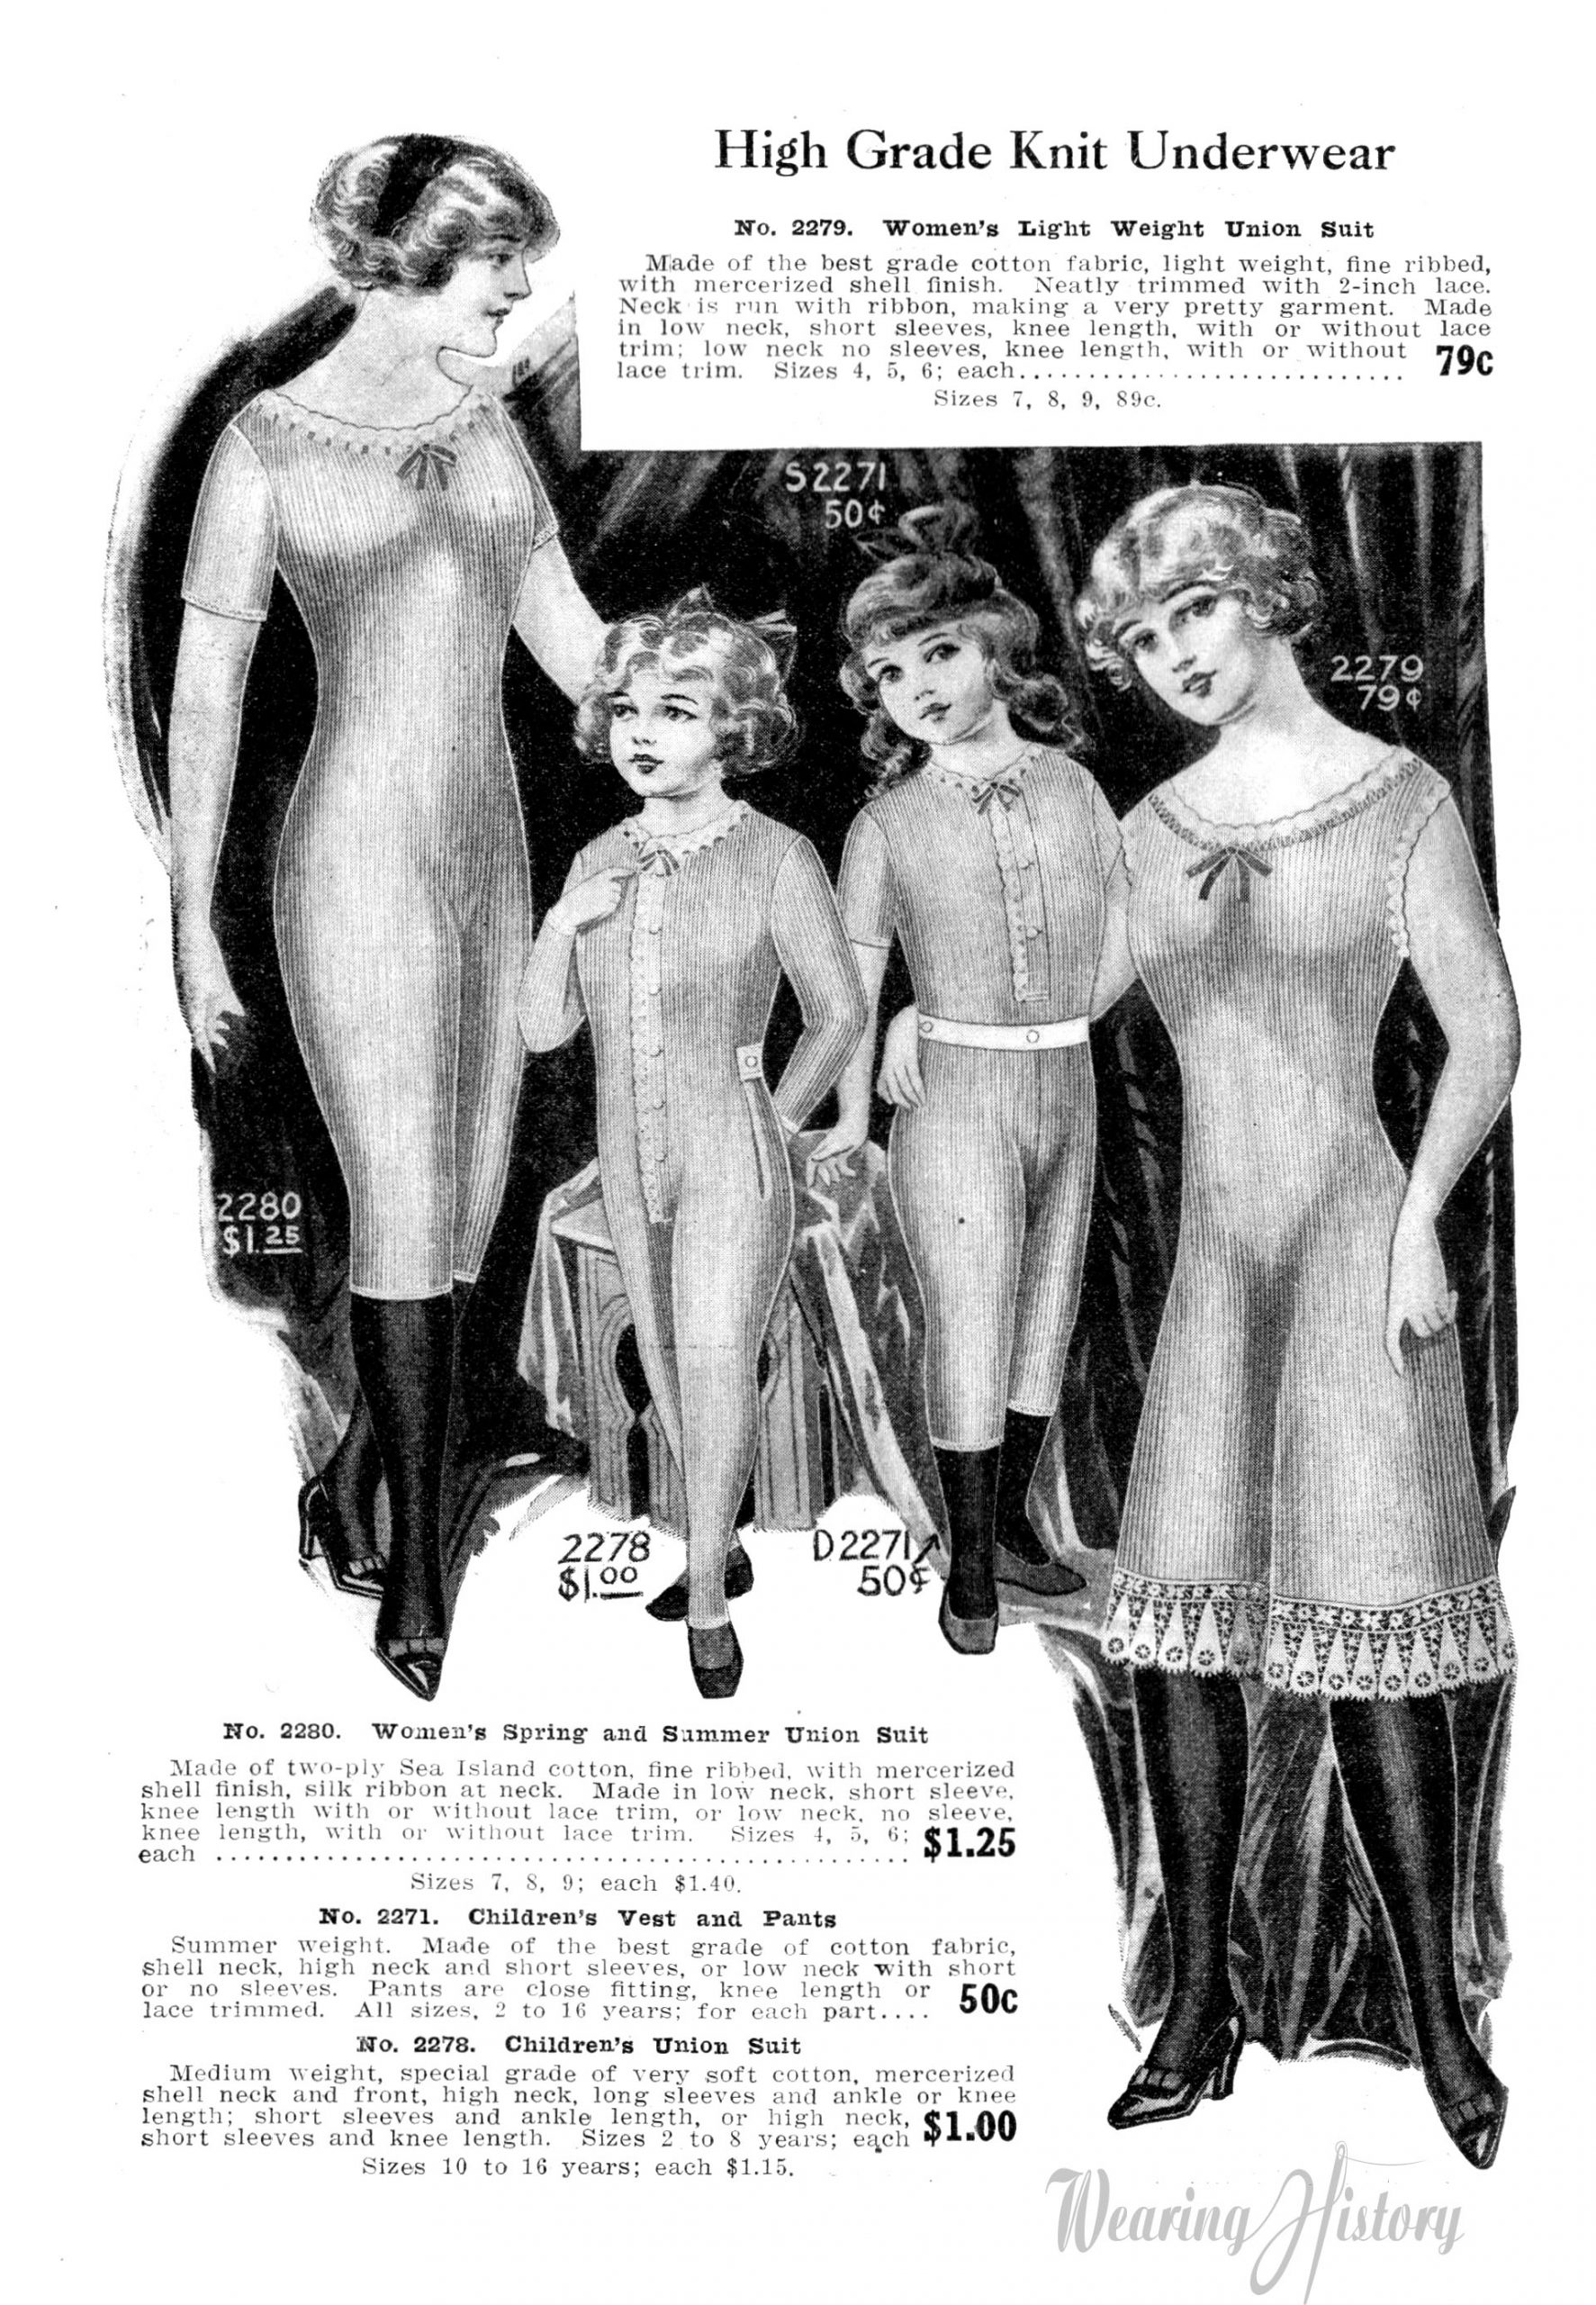 1914- Knit and Woven Combinations, Princess Slips, and More Notes on 1910s  Underwear – Wearing History® Blog